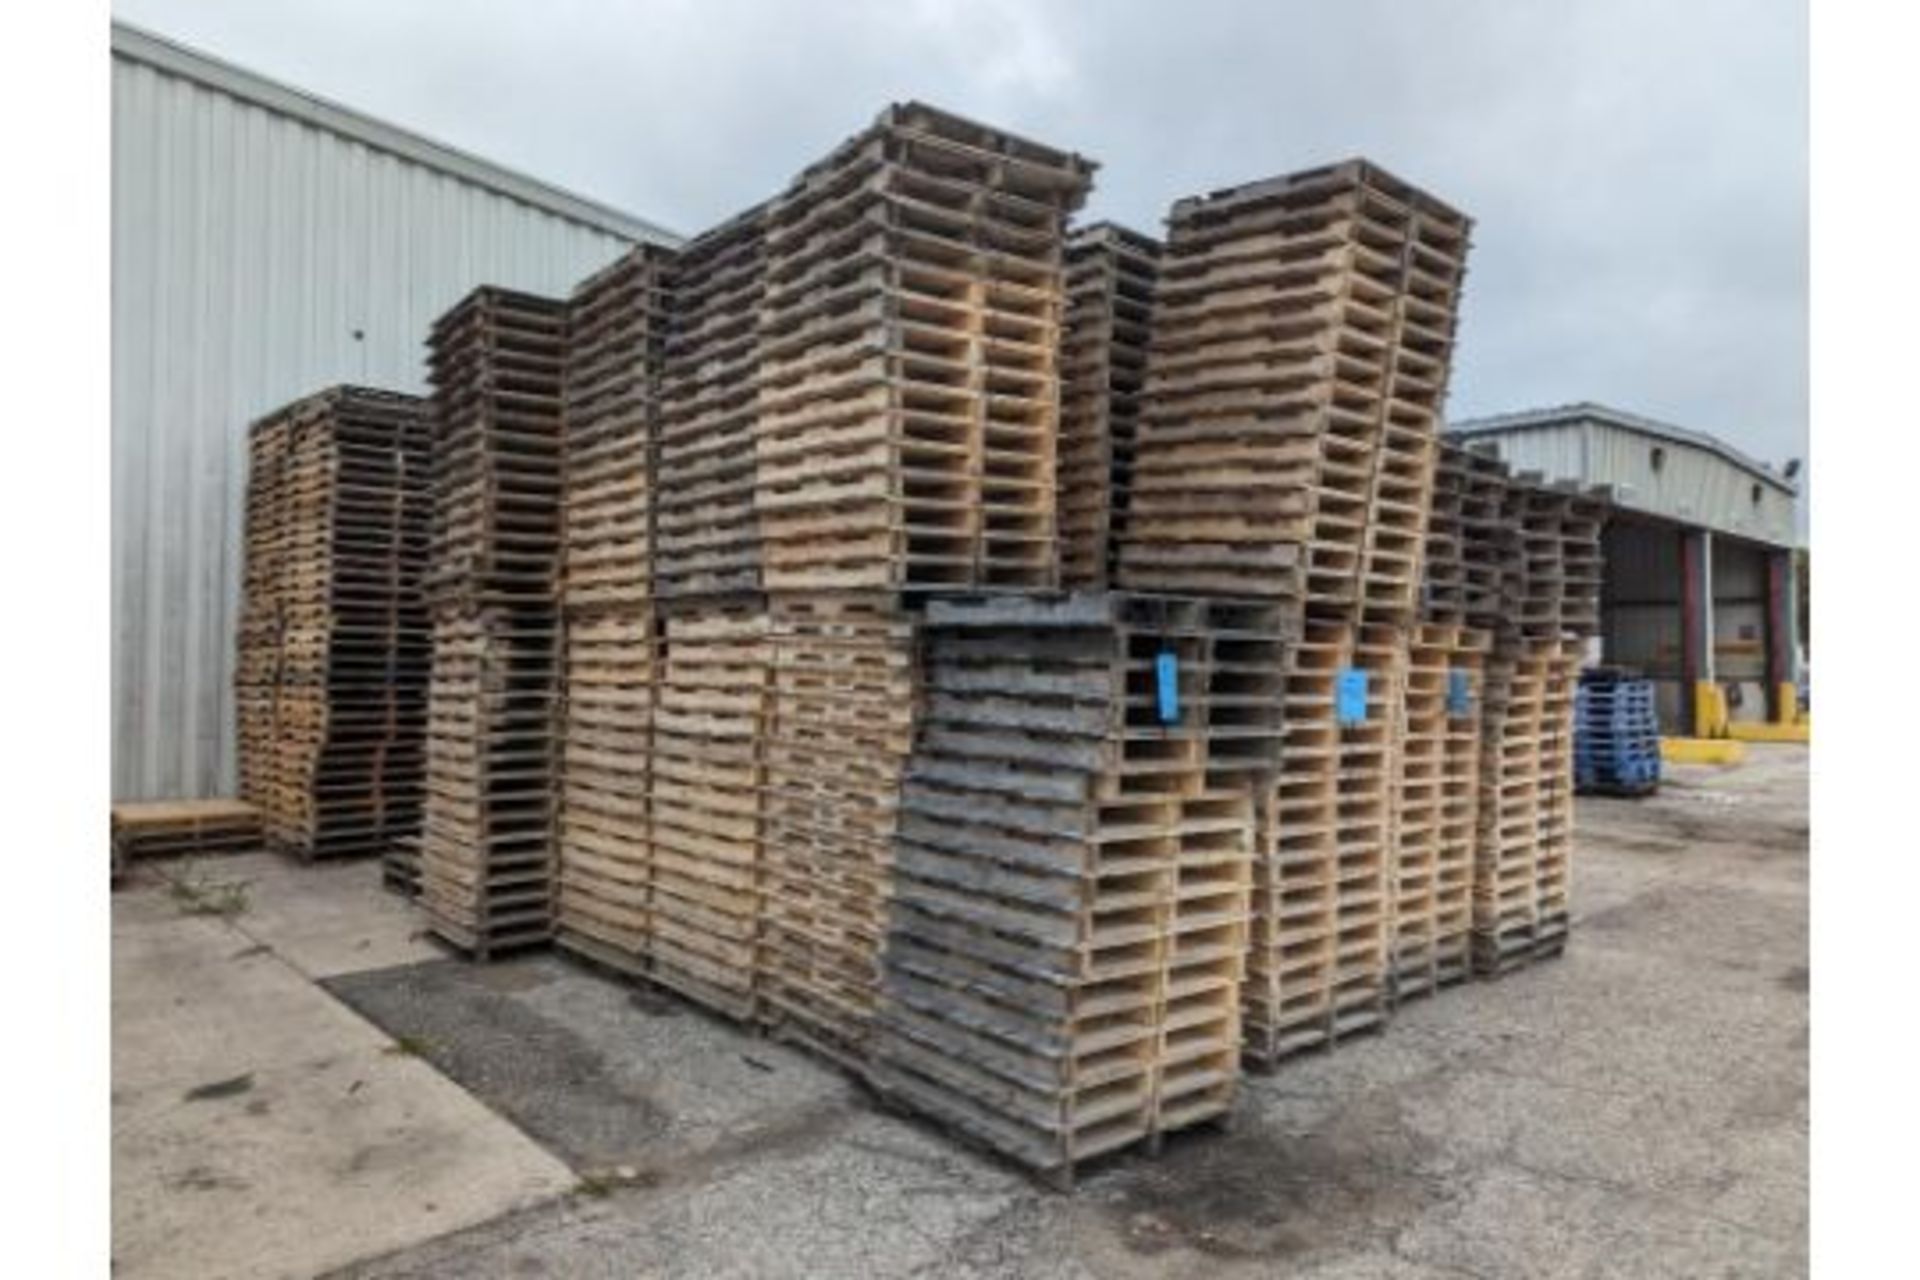 Lot (2030):39" x 39" 4-Way Wooden Pallets, (Counts Approx.), (Loc. West Plant Outside Door 33W) (